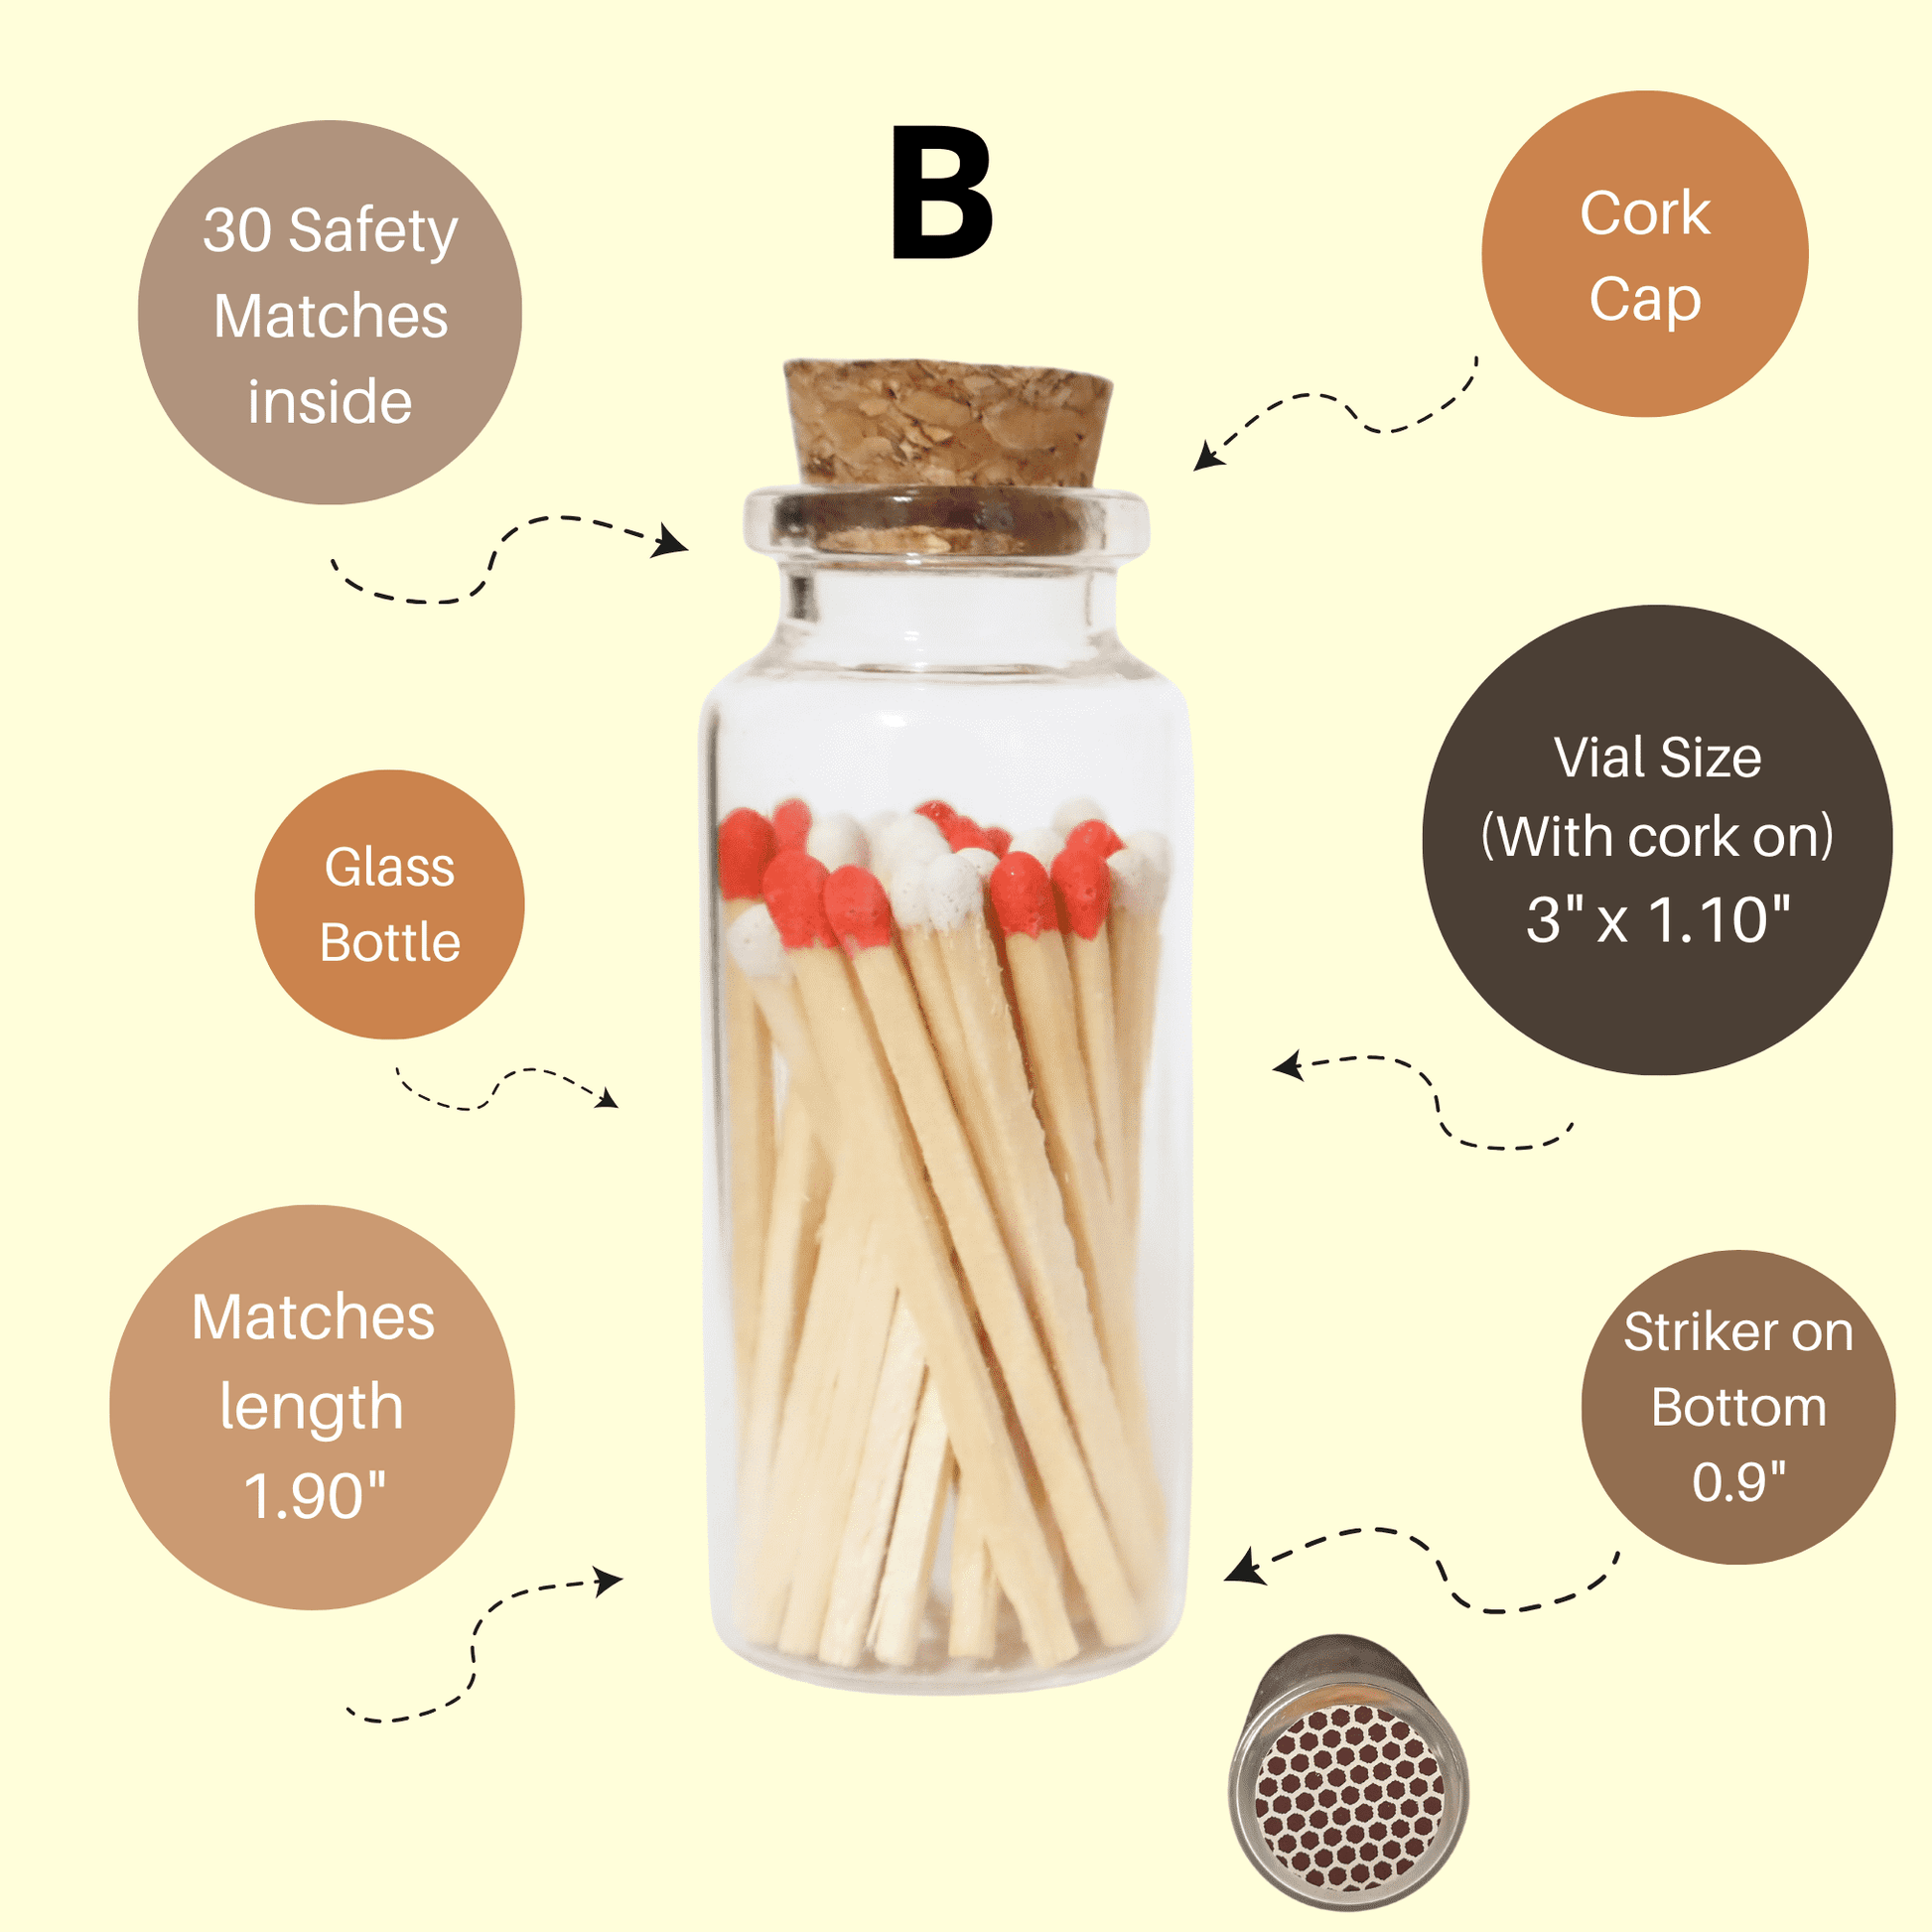 Larger glass bottle with cork cap with 30 matches inside. Matches length 1.90”. Color red tip and white tip safety matches. 